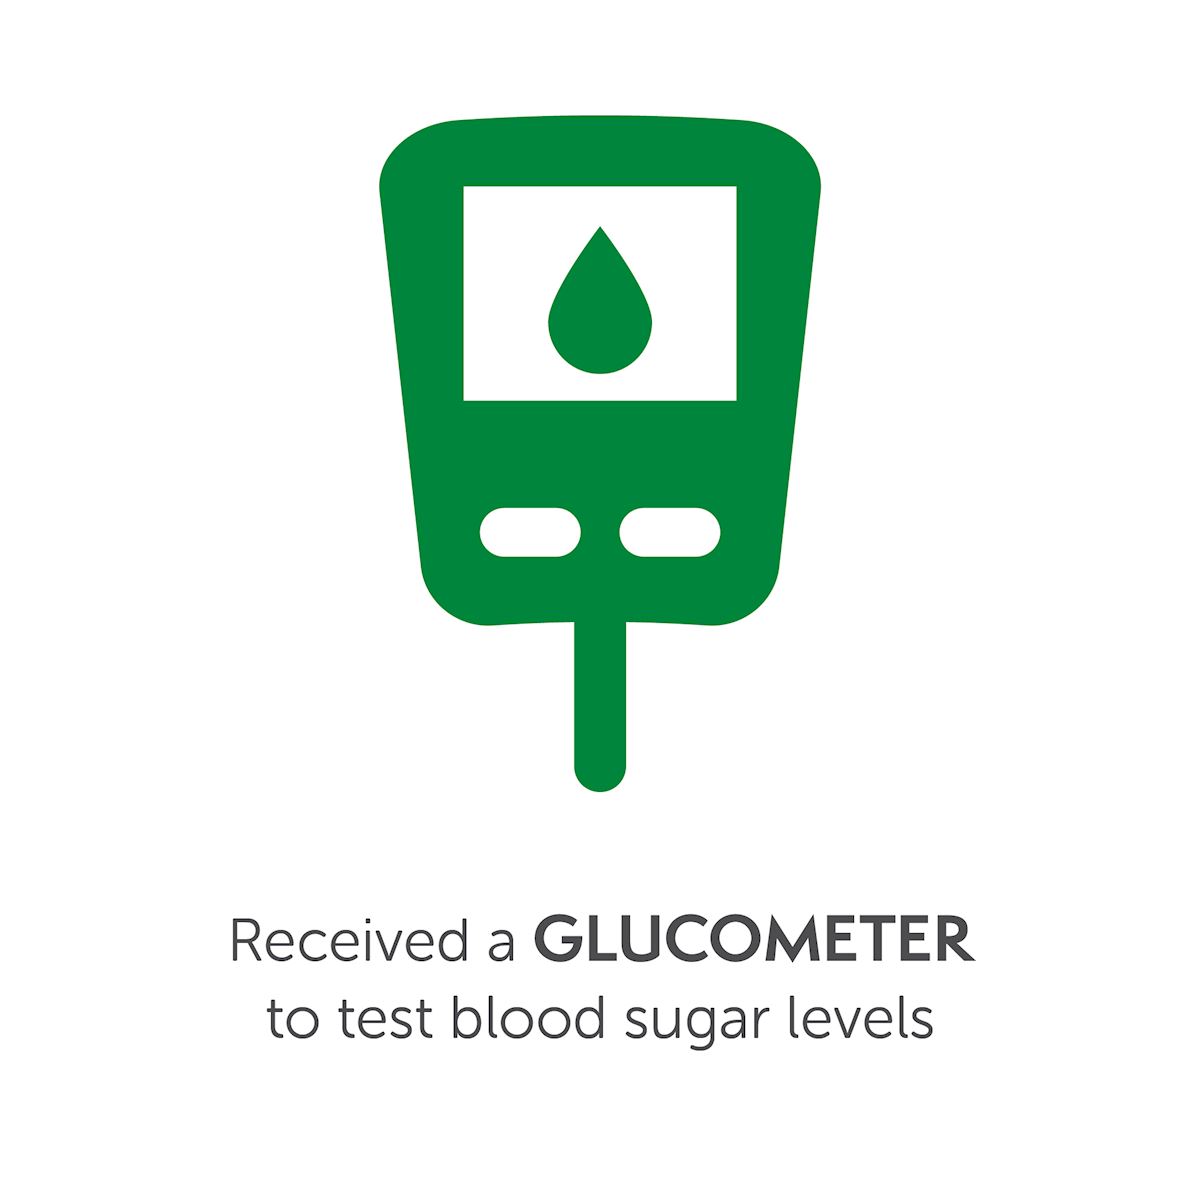 Received a glucometer to test blood sugar levels